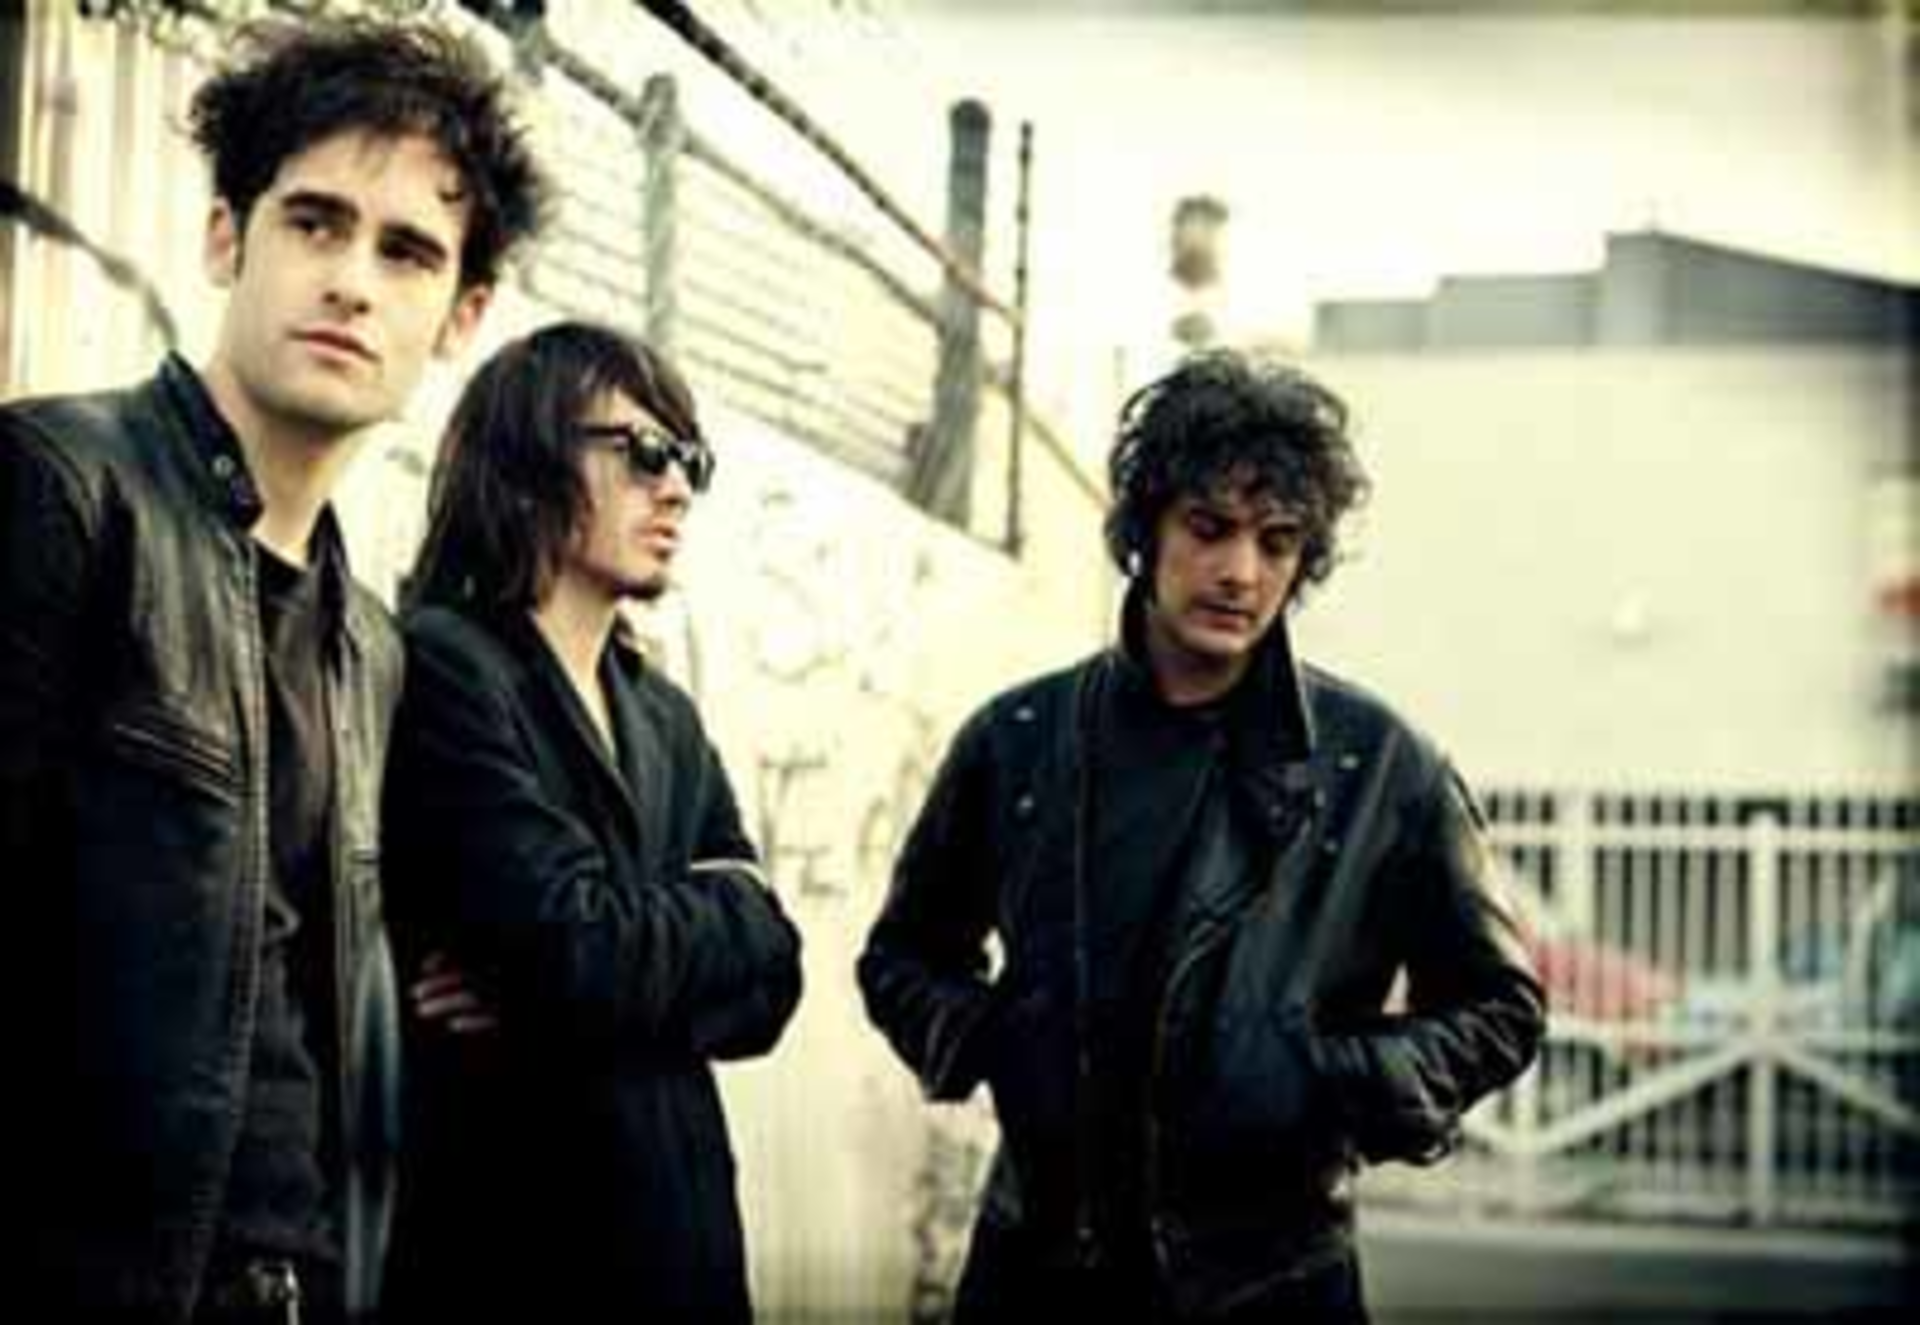 Black Rebel Motorcycle Club revs its engines | Show Previews | Tampa |  Creative Loafing Tampa Bay